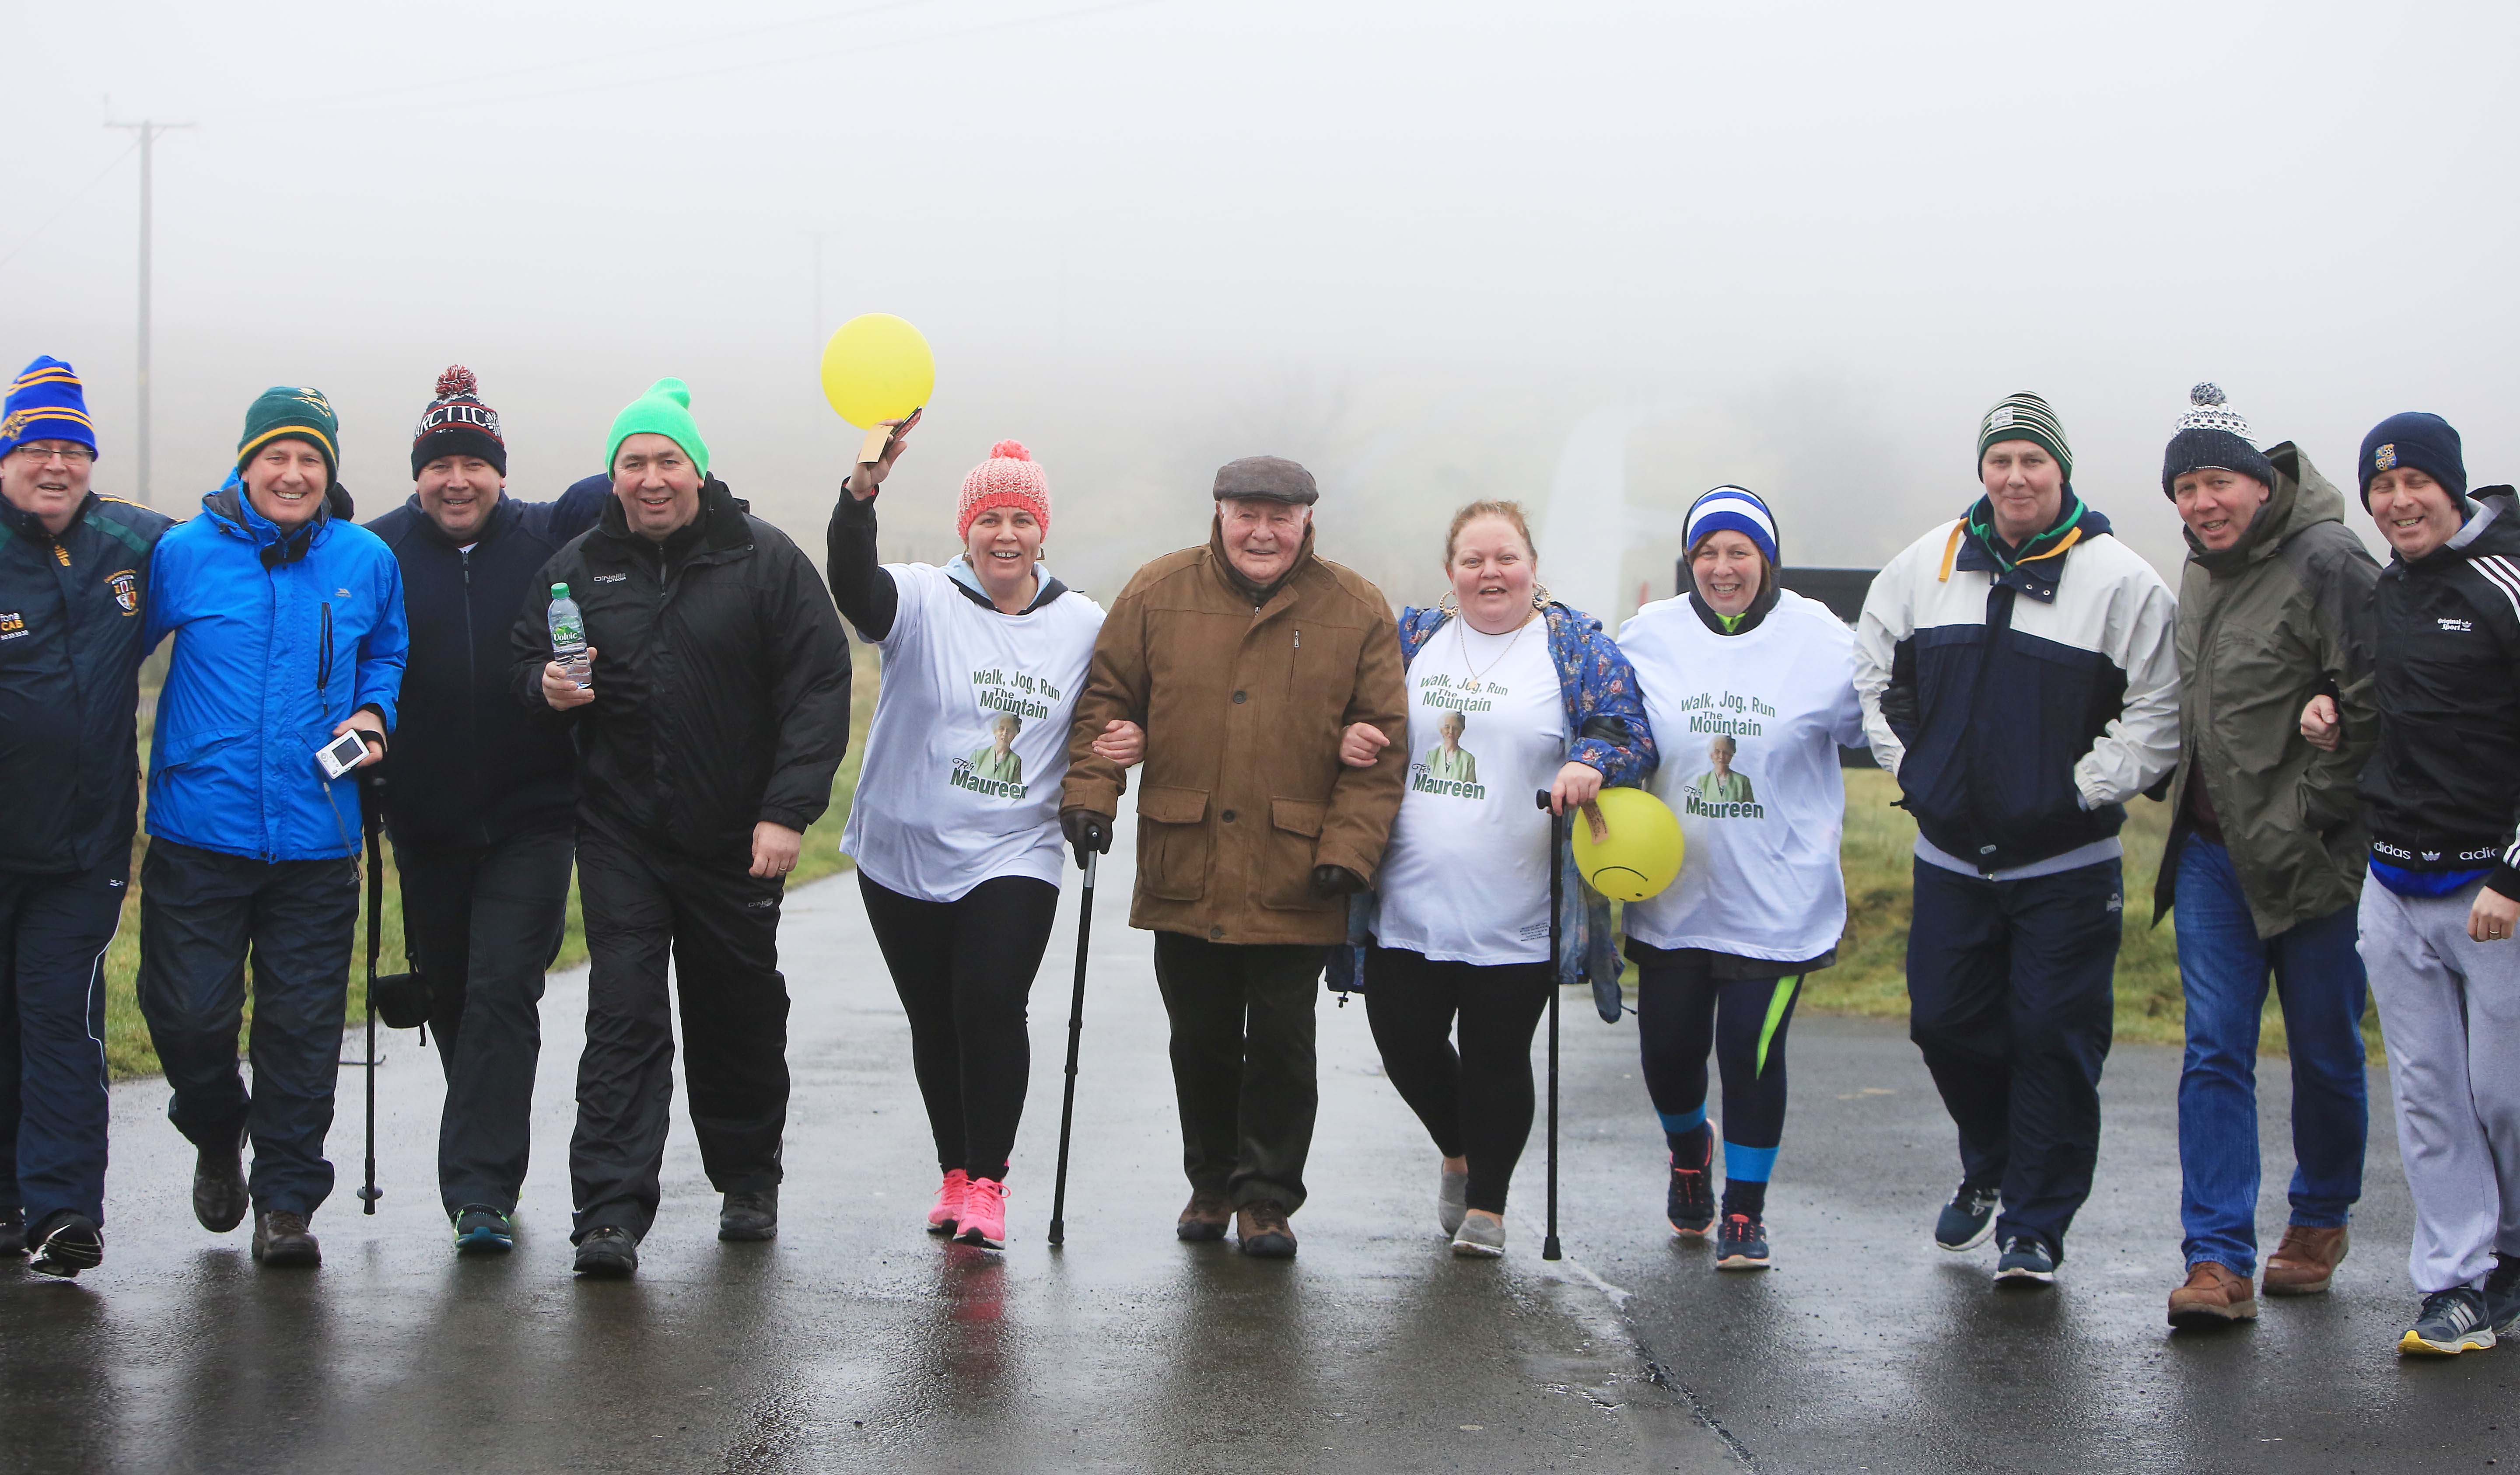 A damp day on Black Mountain didn’t put off the McKiernans who pulled out all the stops in memory of their late and much-loved mother Maureen